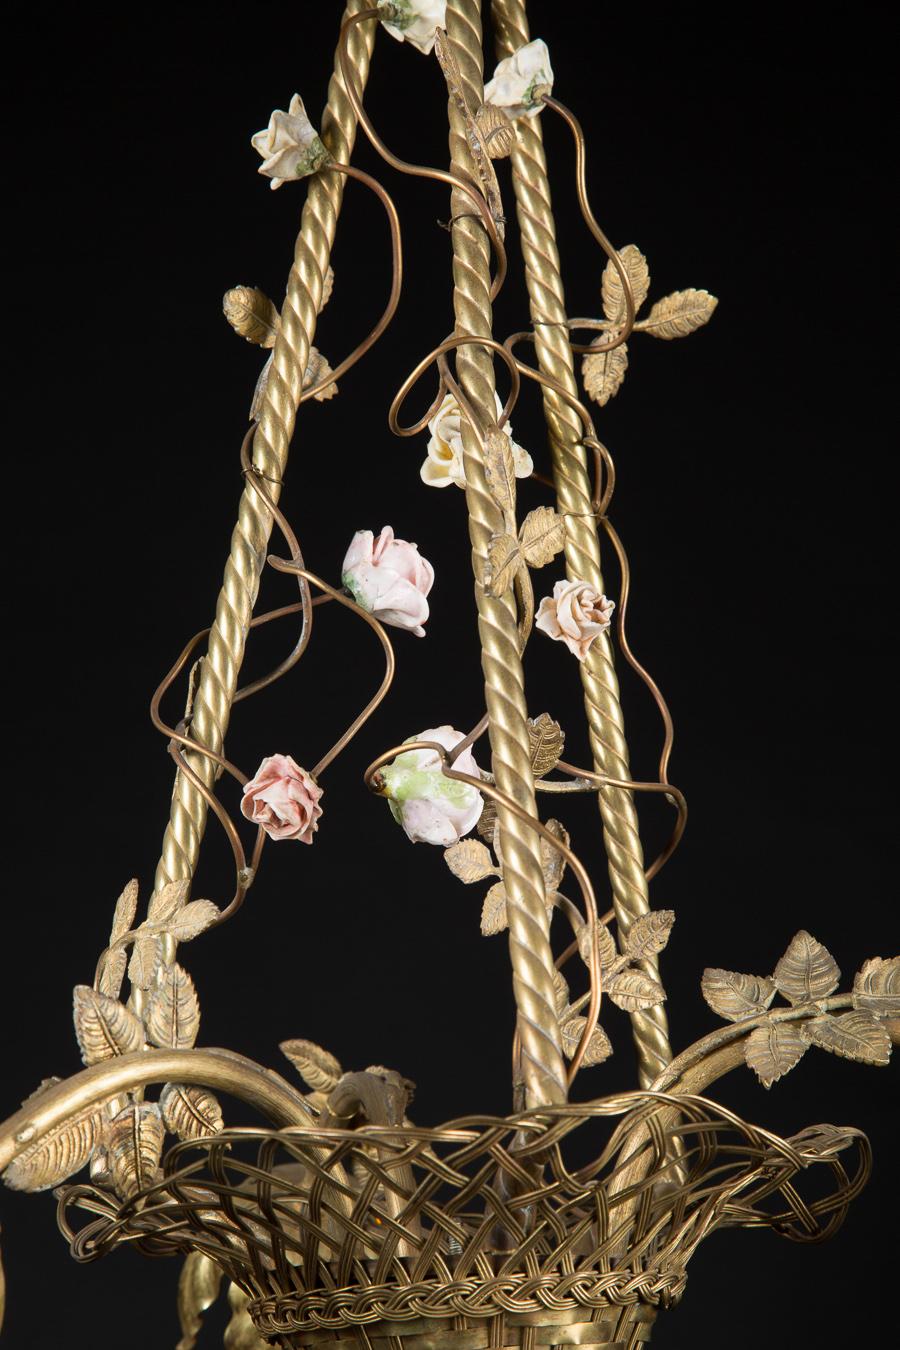 This French Belle Epoque woven basket chandelier is made of bronze and dates back to the late 19th century. Uniquely, and impressively, outside of the porcelain flowers, the entirety of the piece is made of bronze, including the woven basket. The